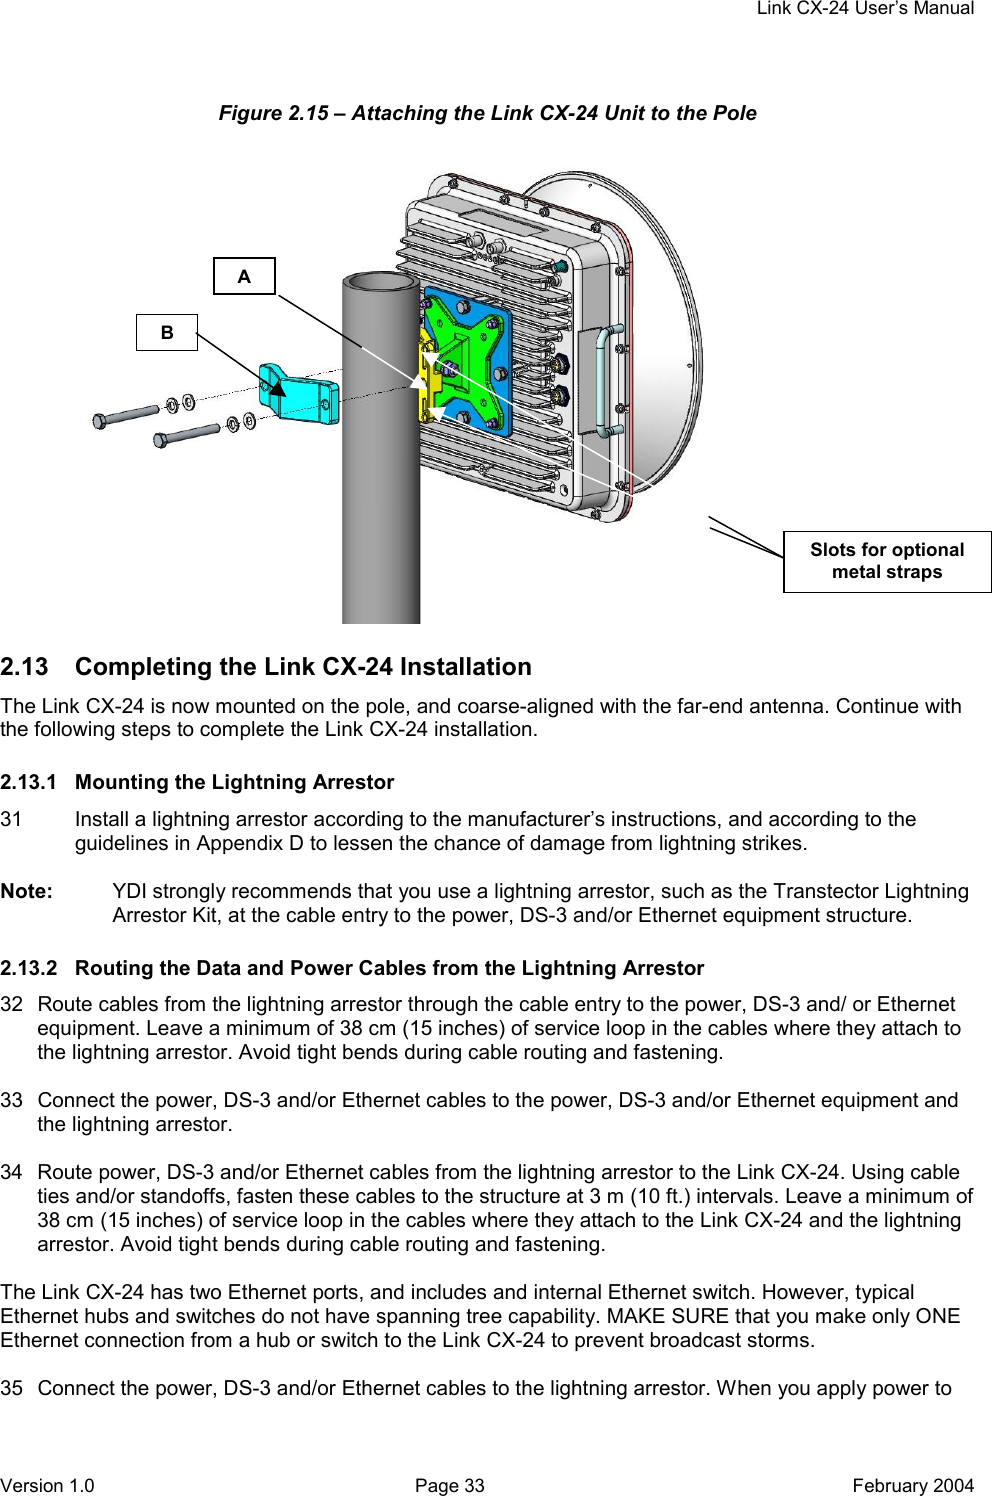     Link CX-24 User’s Manual Version 1.0  Page 33  February 2004 Figure 2.15 – Attaching the Link CX-24 Unit to the Pole                 2.13  Completing the Link CX-24 Installation The Link CX-24 is now mounted on the pole, and coarse-aligned with the far-end antenna. Continue with the following steps to complete the Link CX-24 installation. 2.13.1  Mounting the Lightning Arrestor 31  Install a lightning arrestor according to the manufacturer’s instructions, and according to the guidelines in Appendix D to lessen the chance of damage from lightning strikes.  Note:  YDI strongly recommends that you use a lightning arrestor, such as the Transtector Lightning Arrestor Kit, at the cable entry to the power, DS-3 and/or Ethernet equipment structure. 2.13.2  Routing the Data and Power Cables from the Lightning Arrestor 32  Route cables from the lightning arrestor through the cable entry to the power, DS-3 and/ or Ethernet equipment. Leave a minimum of 38 cm (15 inches) of service loop in the cables where they attach to the lightning arrestor. Avoid tight bends during cable routing and fastening.  33  Connect the power, DS-3 and/or Ethernet cables to the power, DS-3 and/or Ethernet equipment and the lightning arrestor.  34  Route power, DS-3 and/or Ethernet cables from the lightning arrestor to the Link CX-24. Using cable ties and/or standoffs, fasten these cables to the structure at 3 m (10 ft.) intervals. Leave a minimum of 38 cm (15 inches) of service loop in the cables where they attach to the Link CX-24 and the lightning arrestor. Avoid tight bends during cable routing and fastening.  The Link CX-24 has two Ethernet ports, and includes and internal Ethernet switch. However, typical Ethernet hubs and switches do not have spanning tree capability. MAKE SURE that you make only ONE Ethernet connection from a hub or switch to the Link CX-24 to prevent broadcast storms.  35  Connect the power, DS-3 and/or Ethernet cables to the lightning arrestor. When you apply power to B A Slots for optional metal straps 